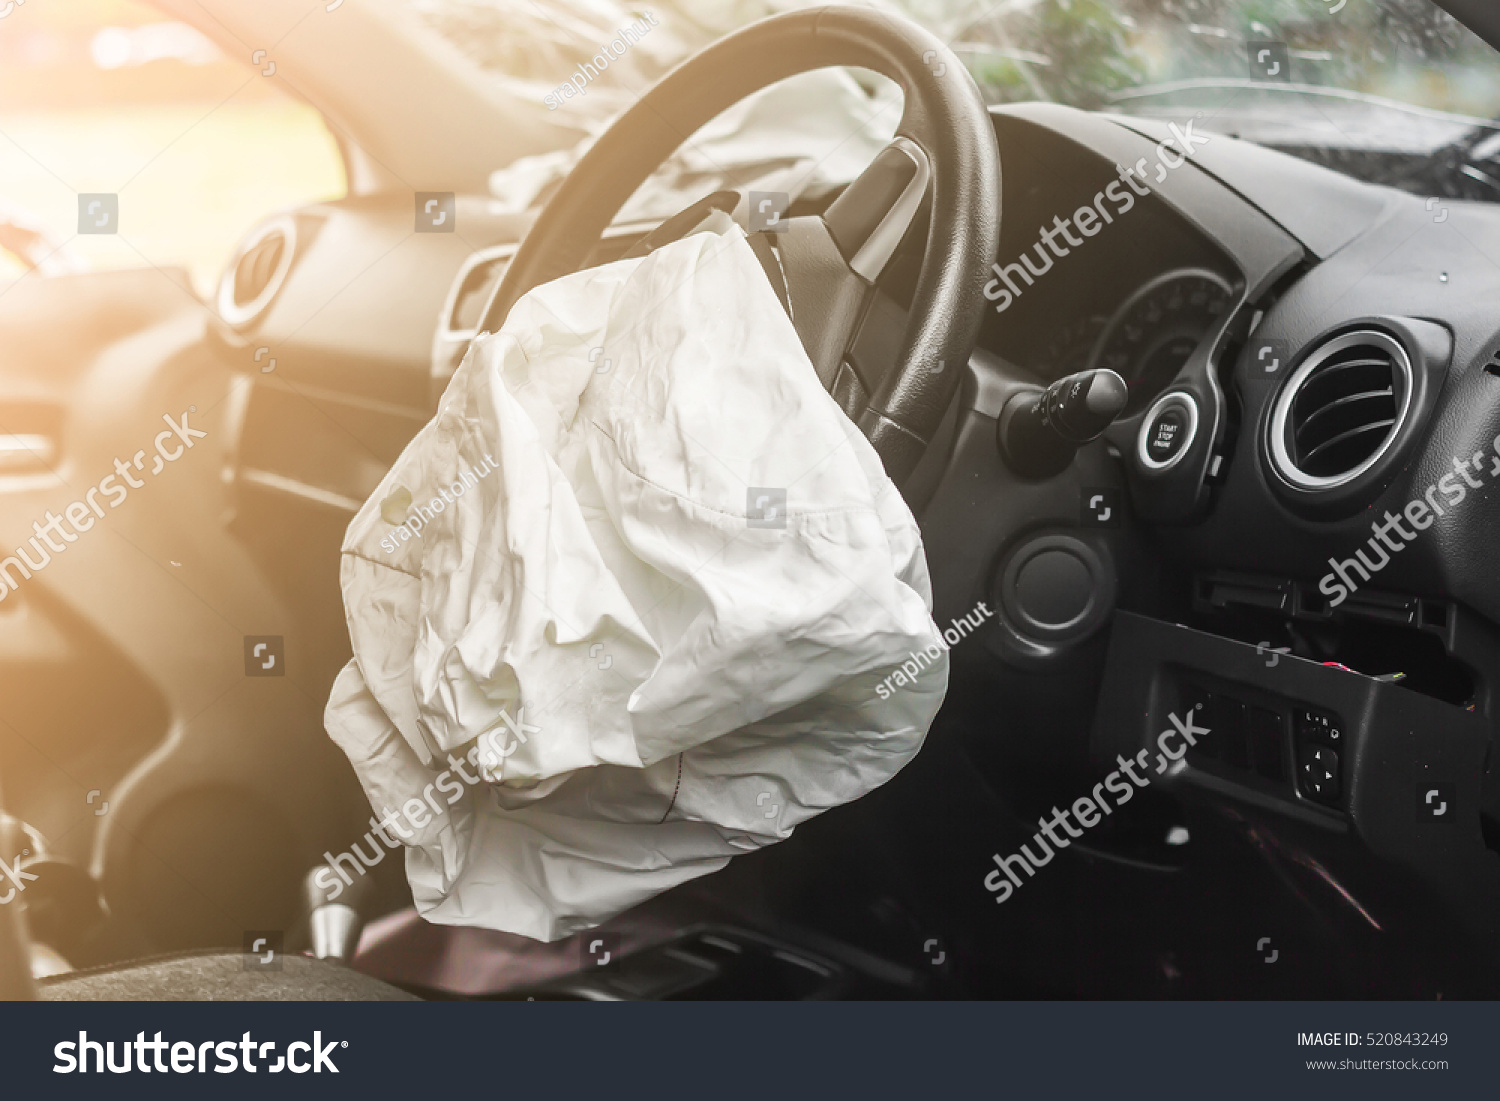 Airbag exploded at a car accident with illuminated #520843249